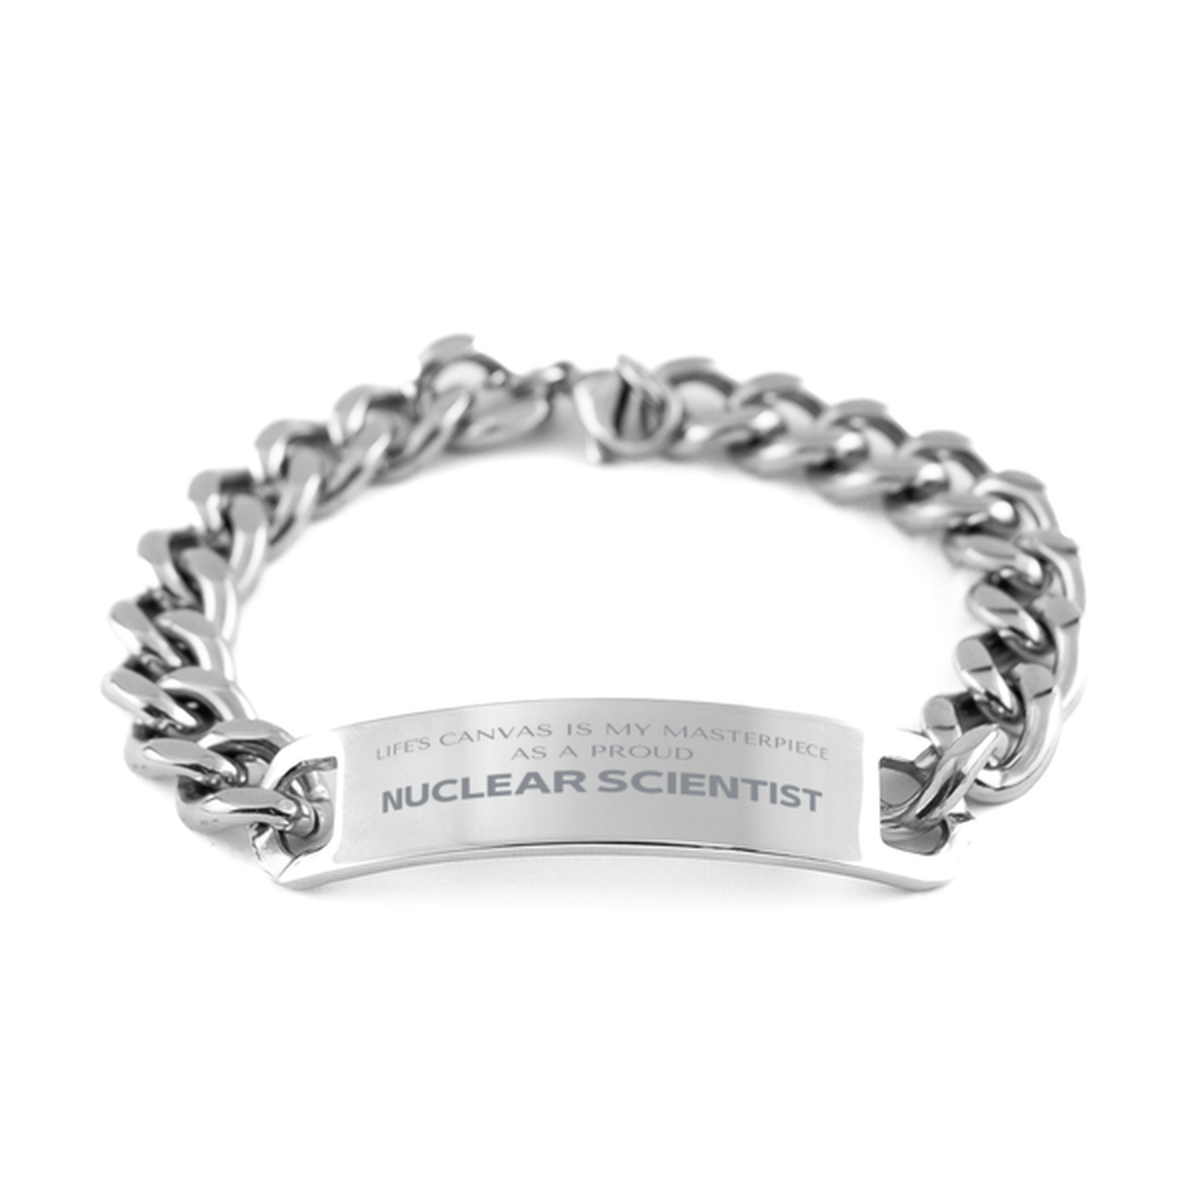 Proud Nuclear Scientist Gifts, Life's canvas is my masterpiece, Epic Birthday Christmas Unique Cuban Chain Stainless Steel Bracelet For Nuclear Scientist, Coworkers, Men, Women, Friends